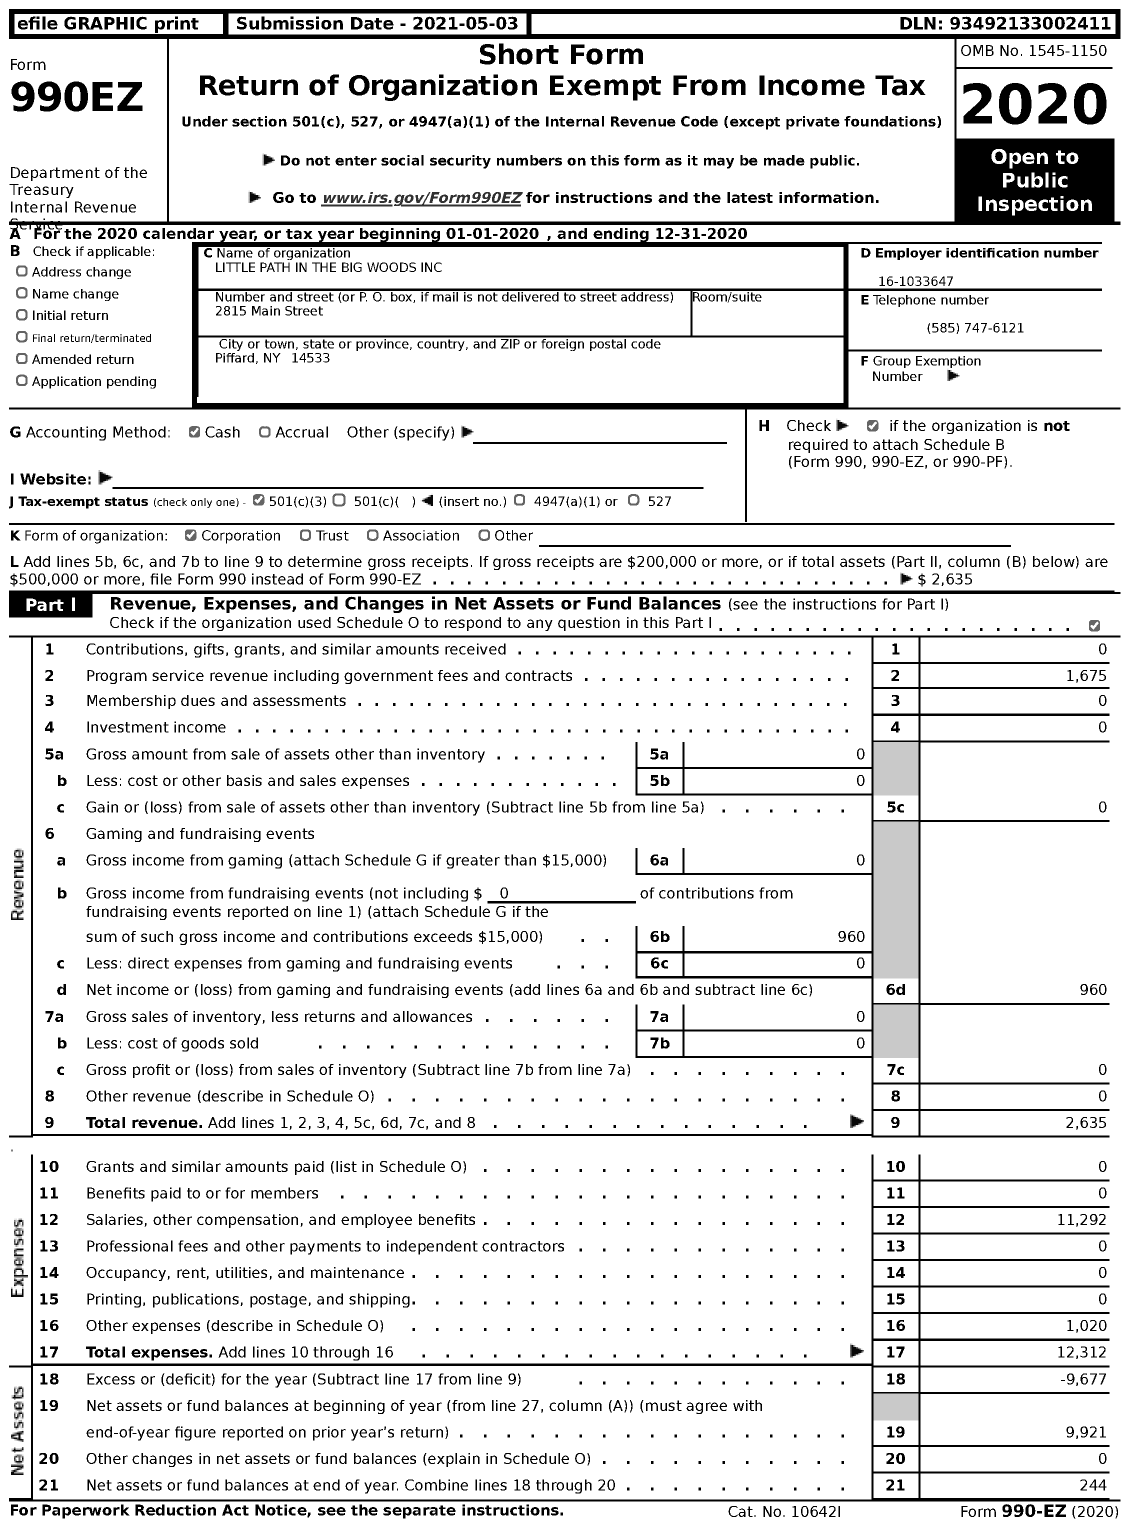 Image of first page of 2020 Form 990EZ for Little Path in the Big Woods